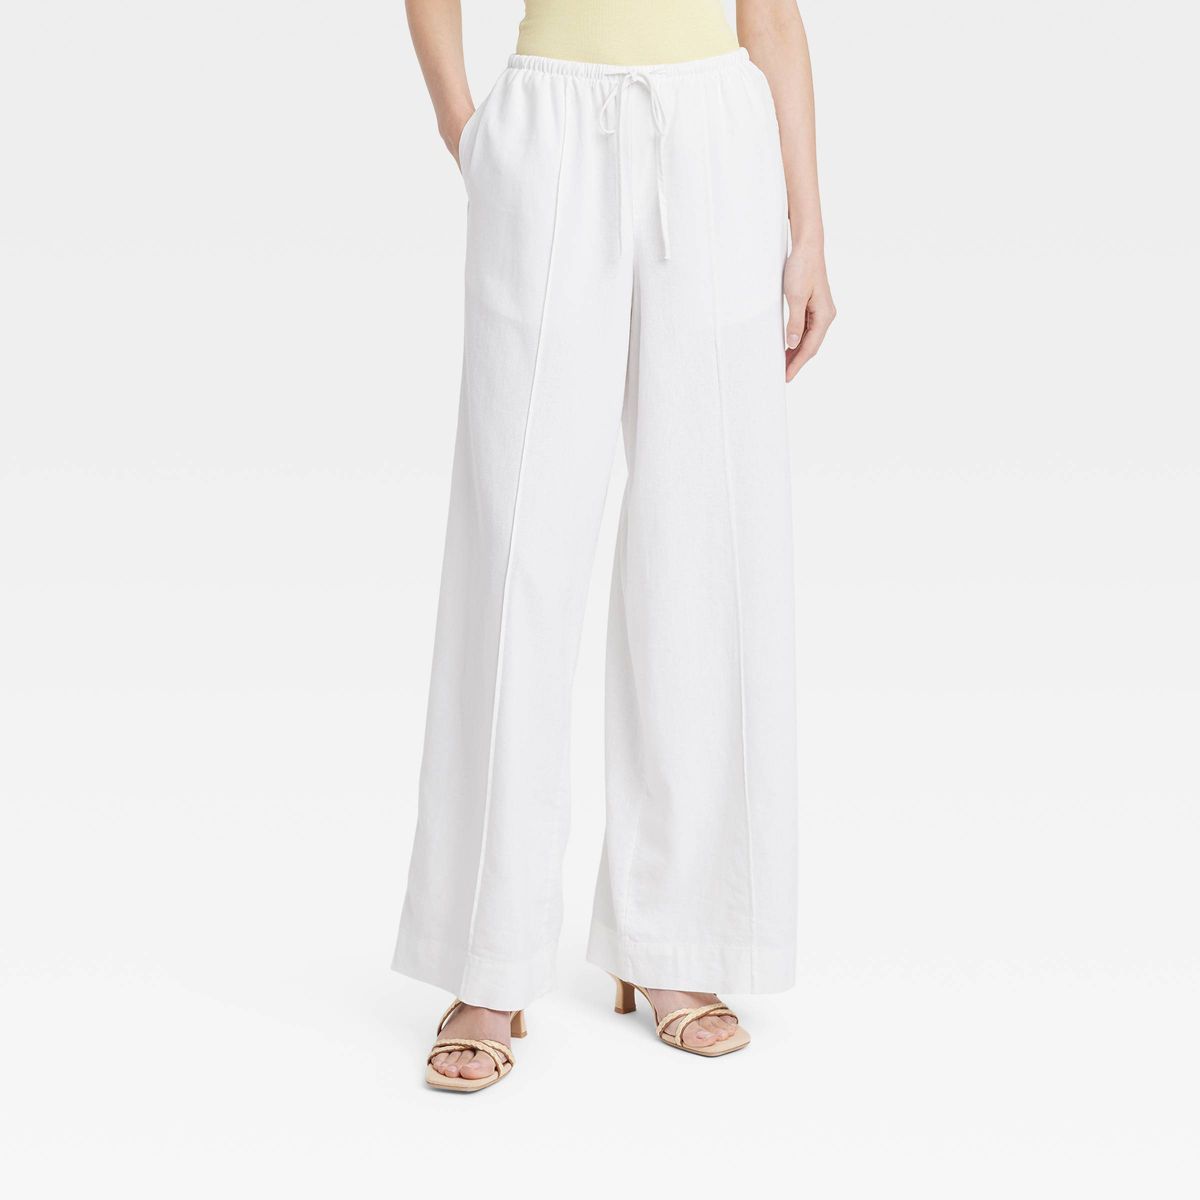 Women's High-Rise Wide Leg Linen Pull-On Pants - A New Day™ White XL | Target